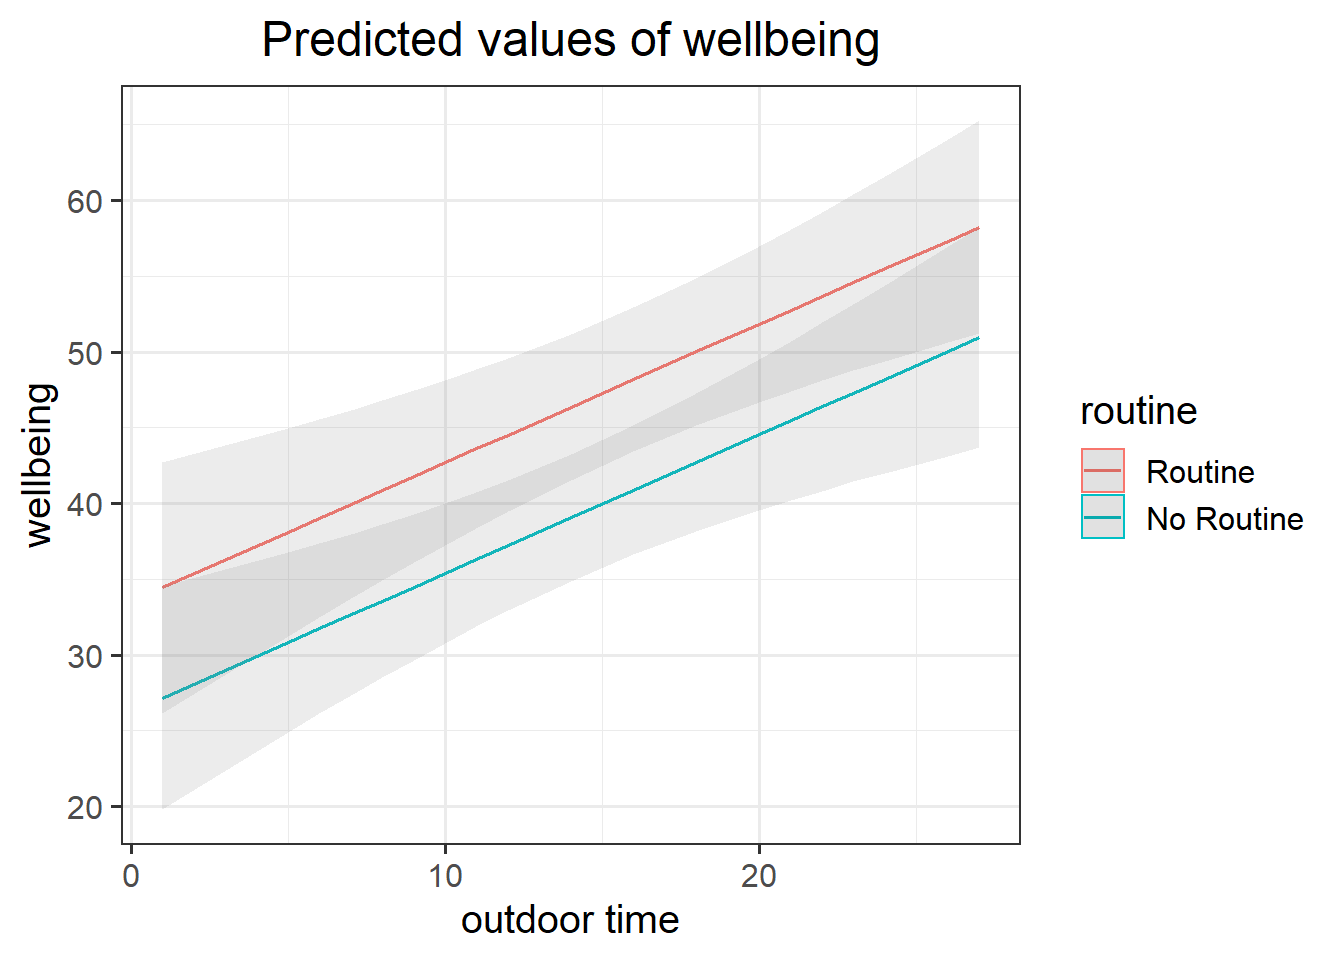 Multiple regression model: Wellbeing ~ Outdoor Time + Routine